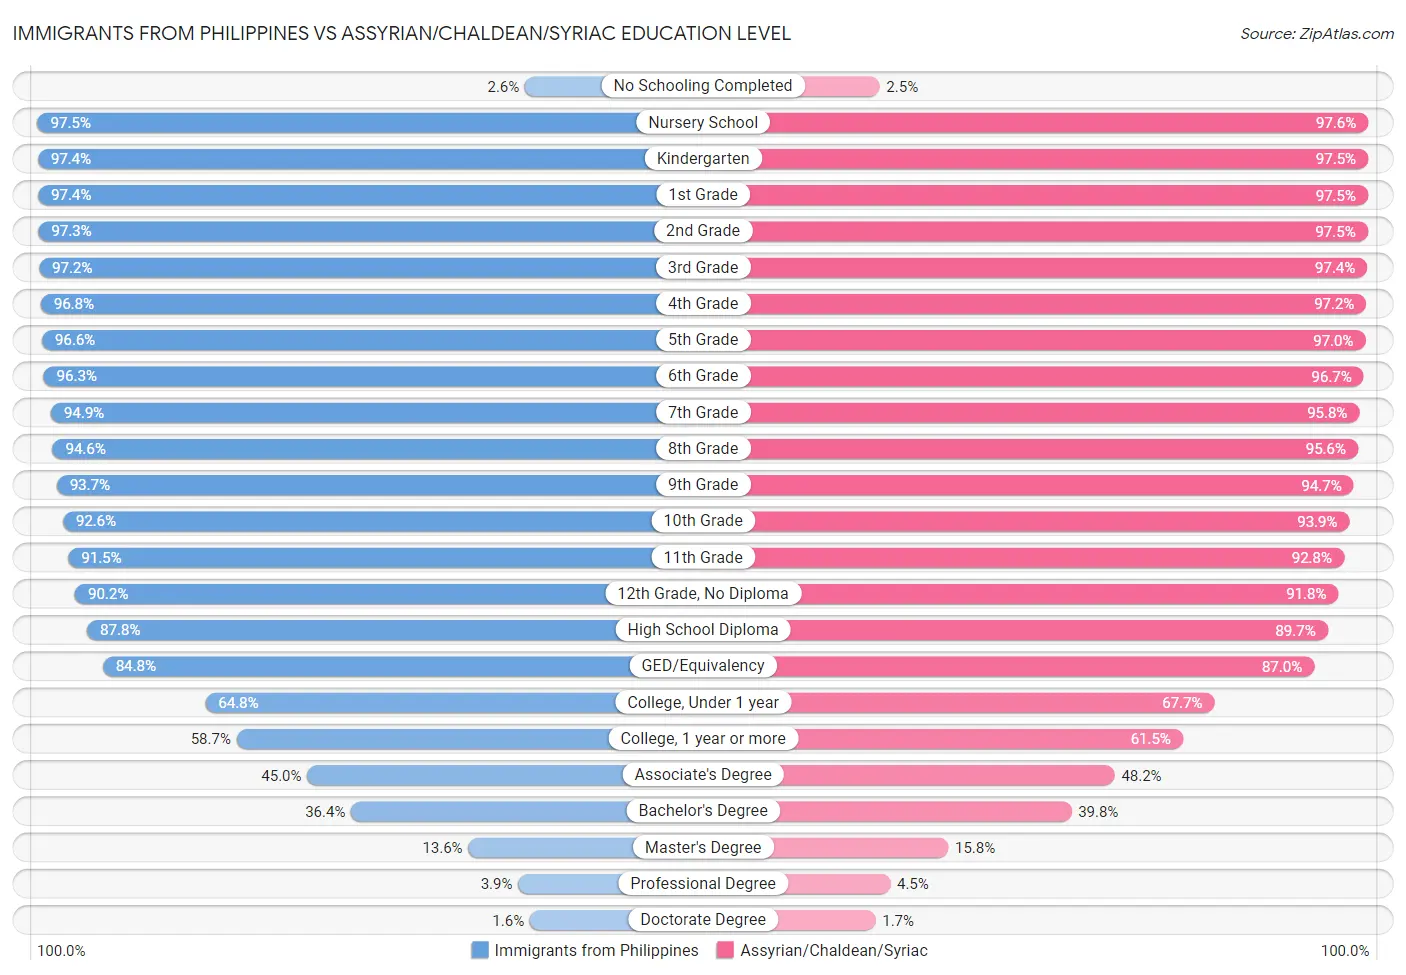 Immigrants from Philippines vs Assyrian/Chaldean/Syriac Education Level